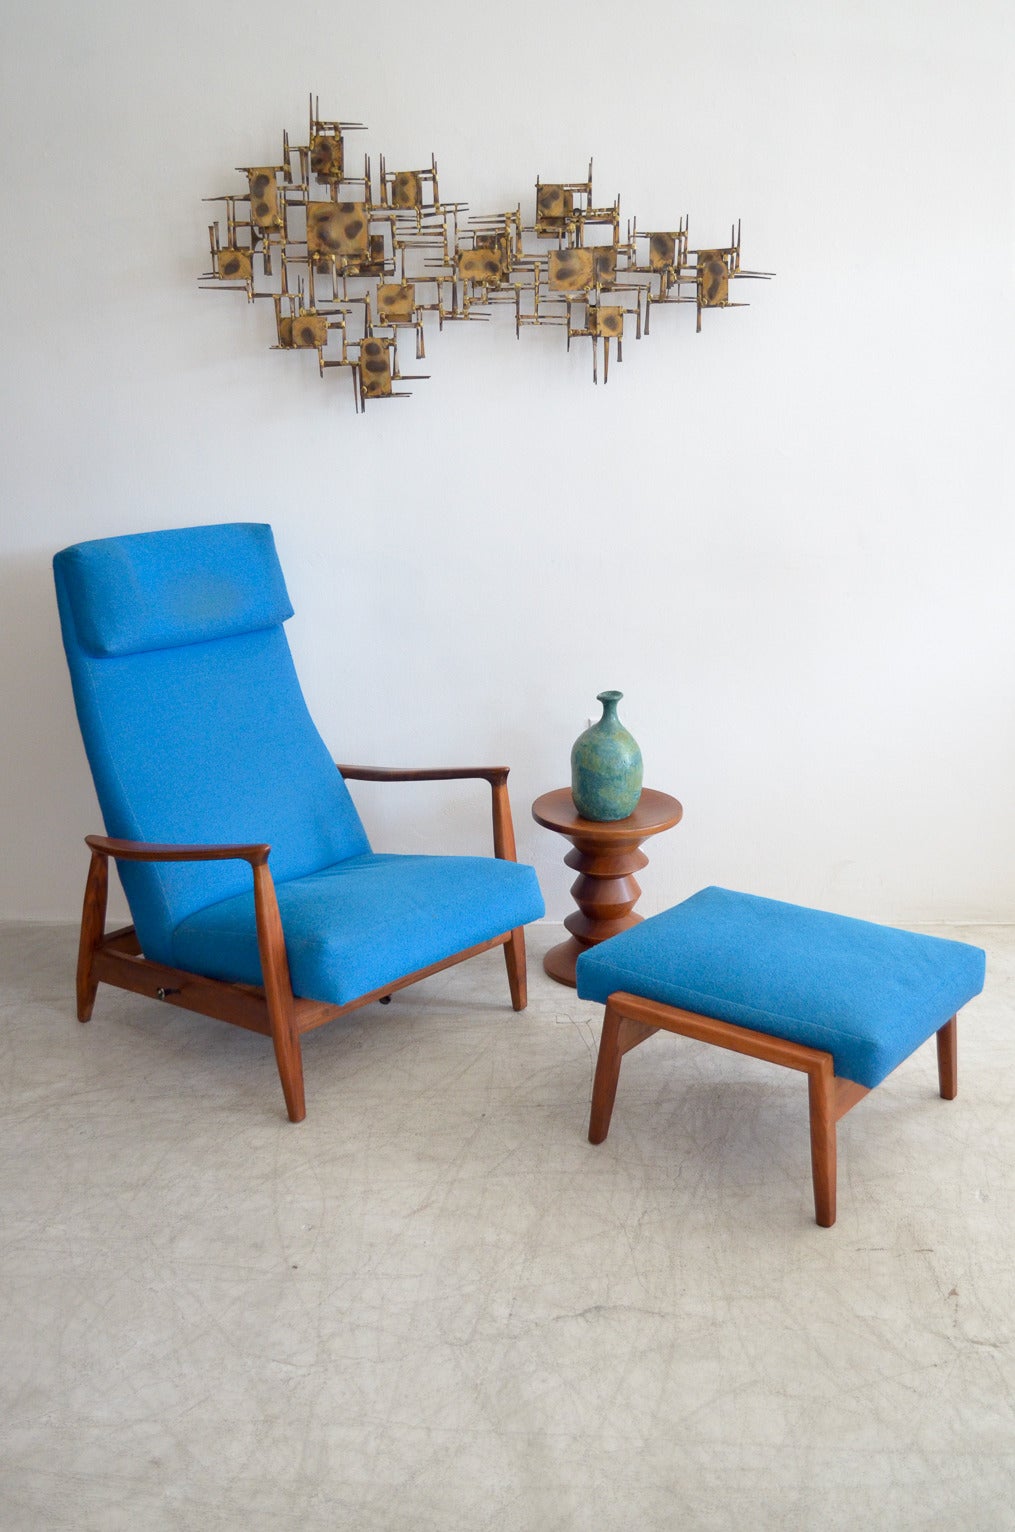 Milo Baughman for Thayer Coggin reclining high back lounge chair in royal blue wool vintage fabric with matching walnut ottoman that tilts for comfort.

Lounge chair has two settings, one is stationary and one locks into place with mechanism on